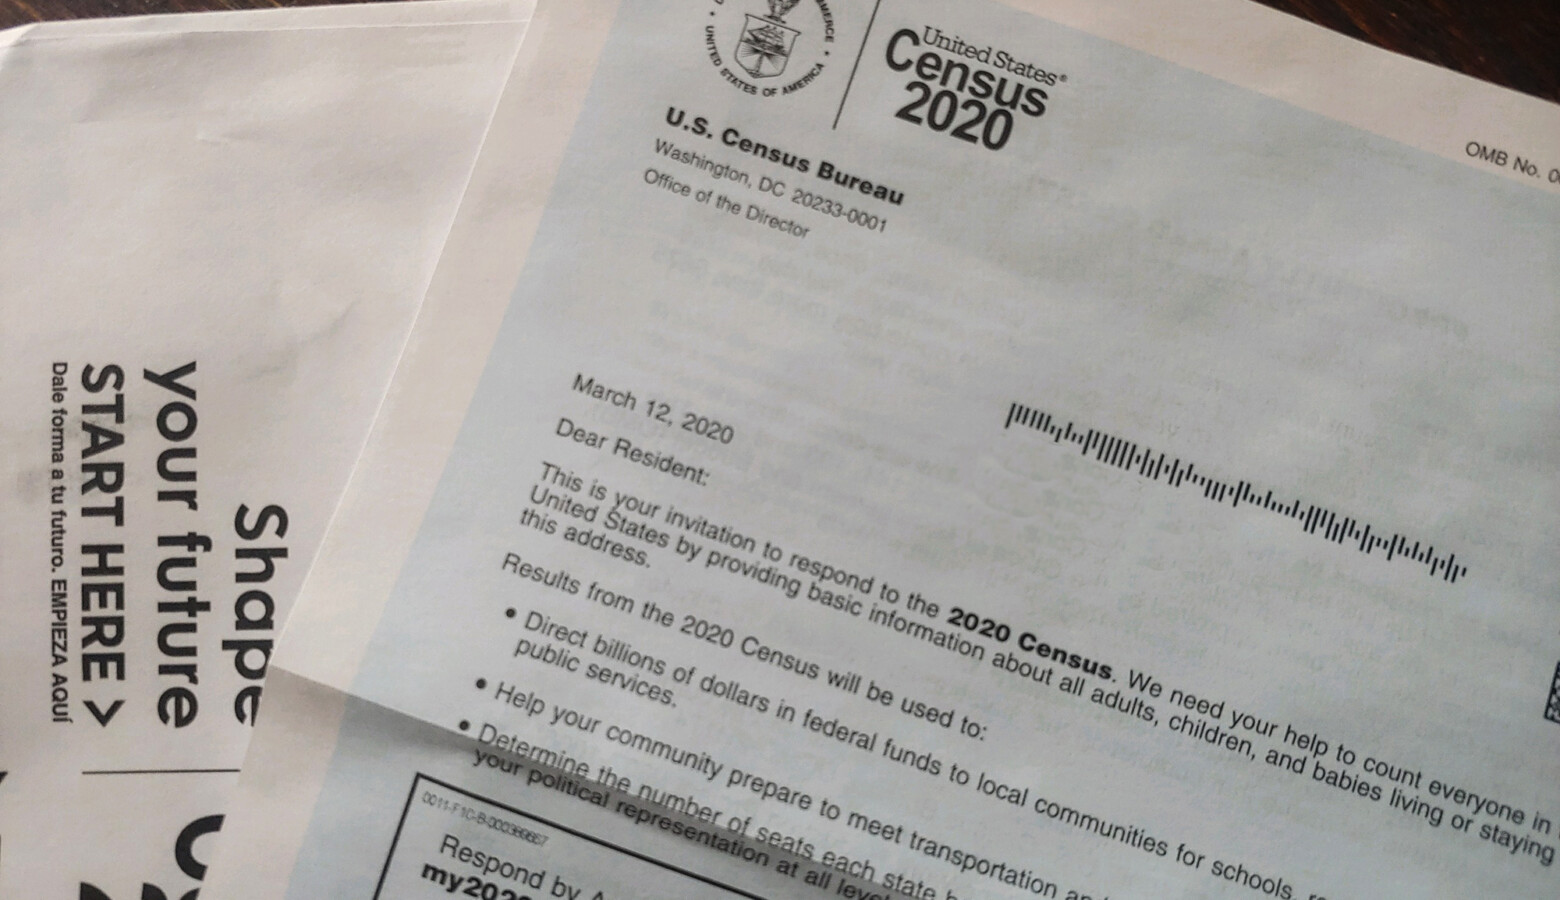 The U.S. Census Bureau will stop counting at the end of September, a month earlier than planned. That could threaten the accuracy of the census if many people go uncounted. (Sarah Neal-Estes/WFYI)